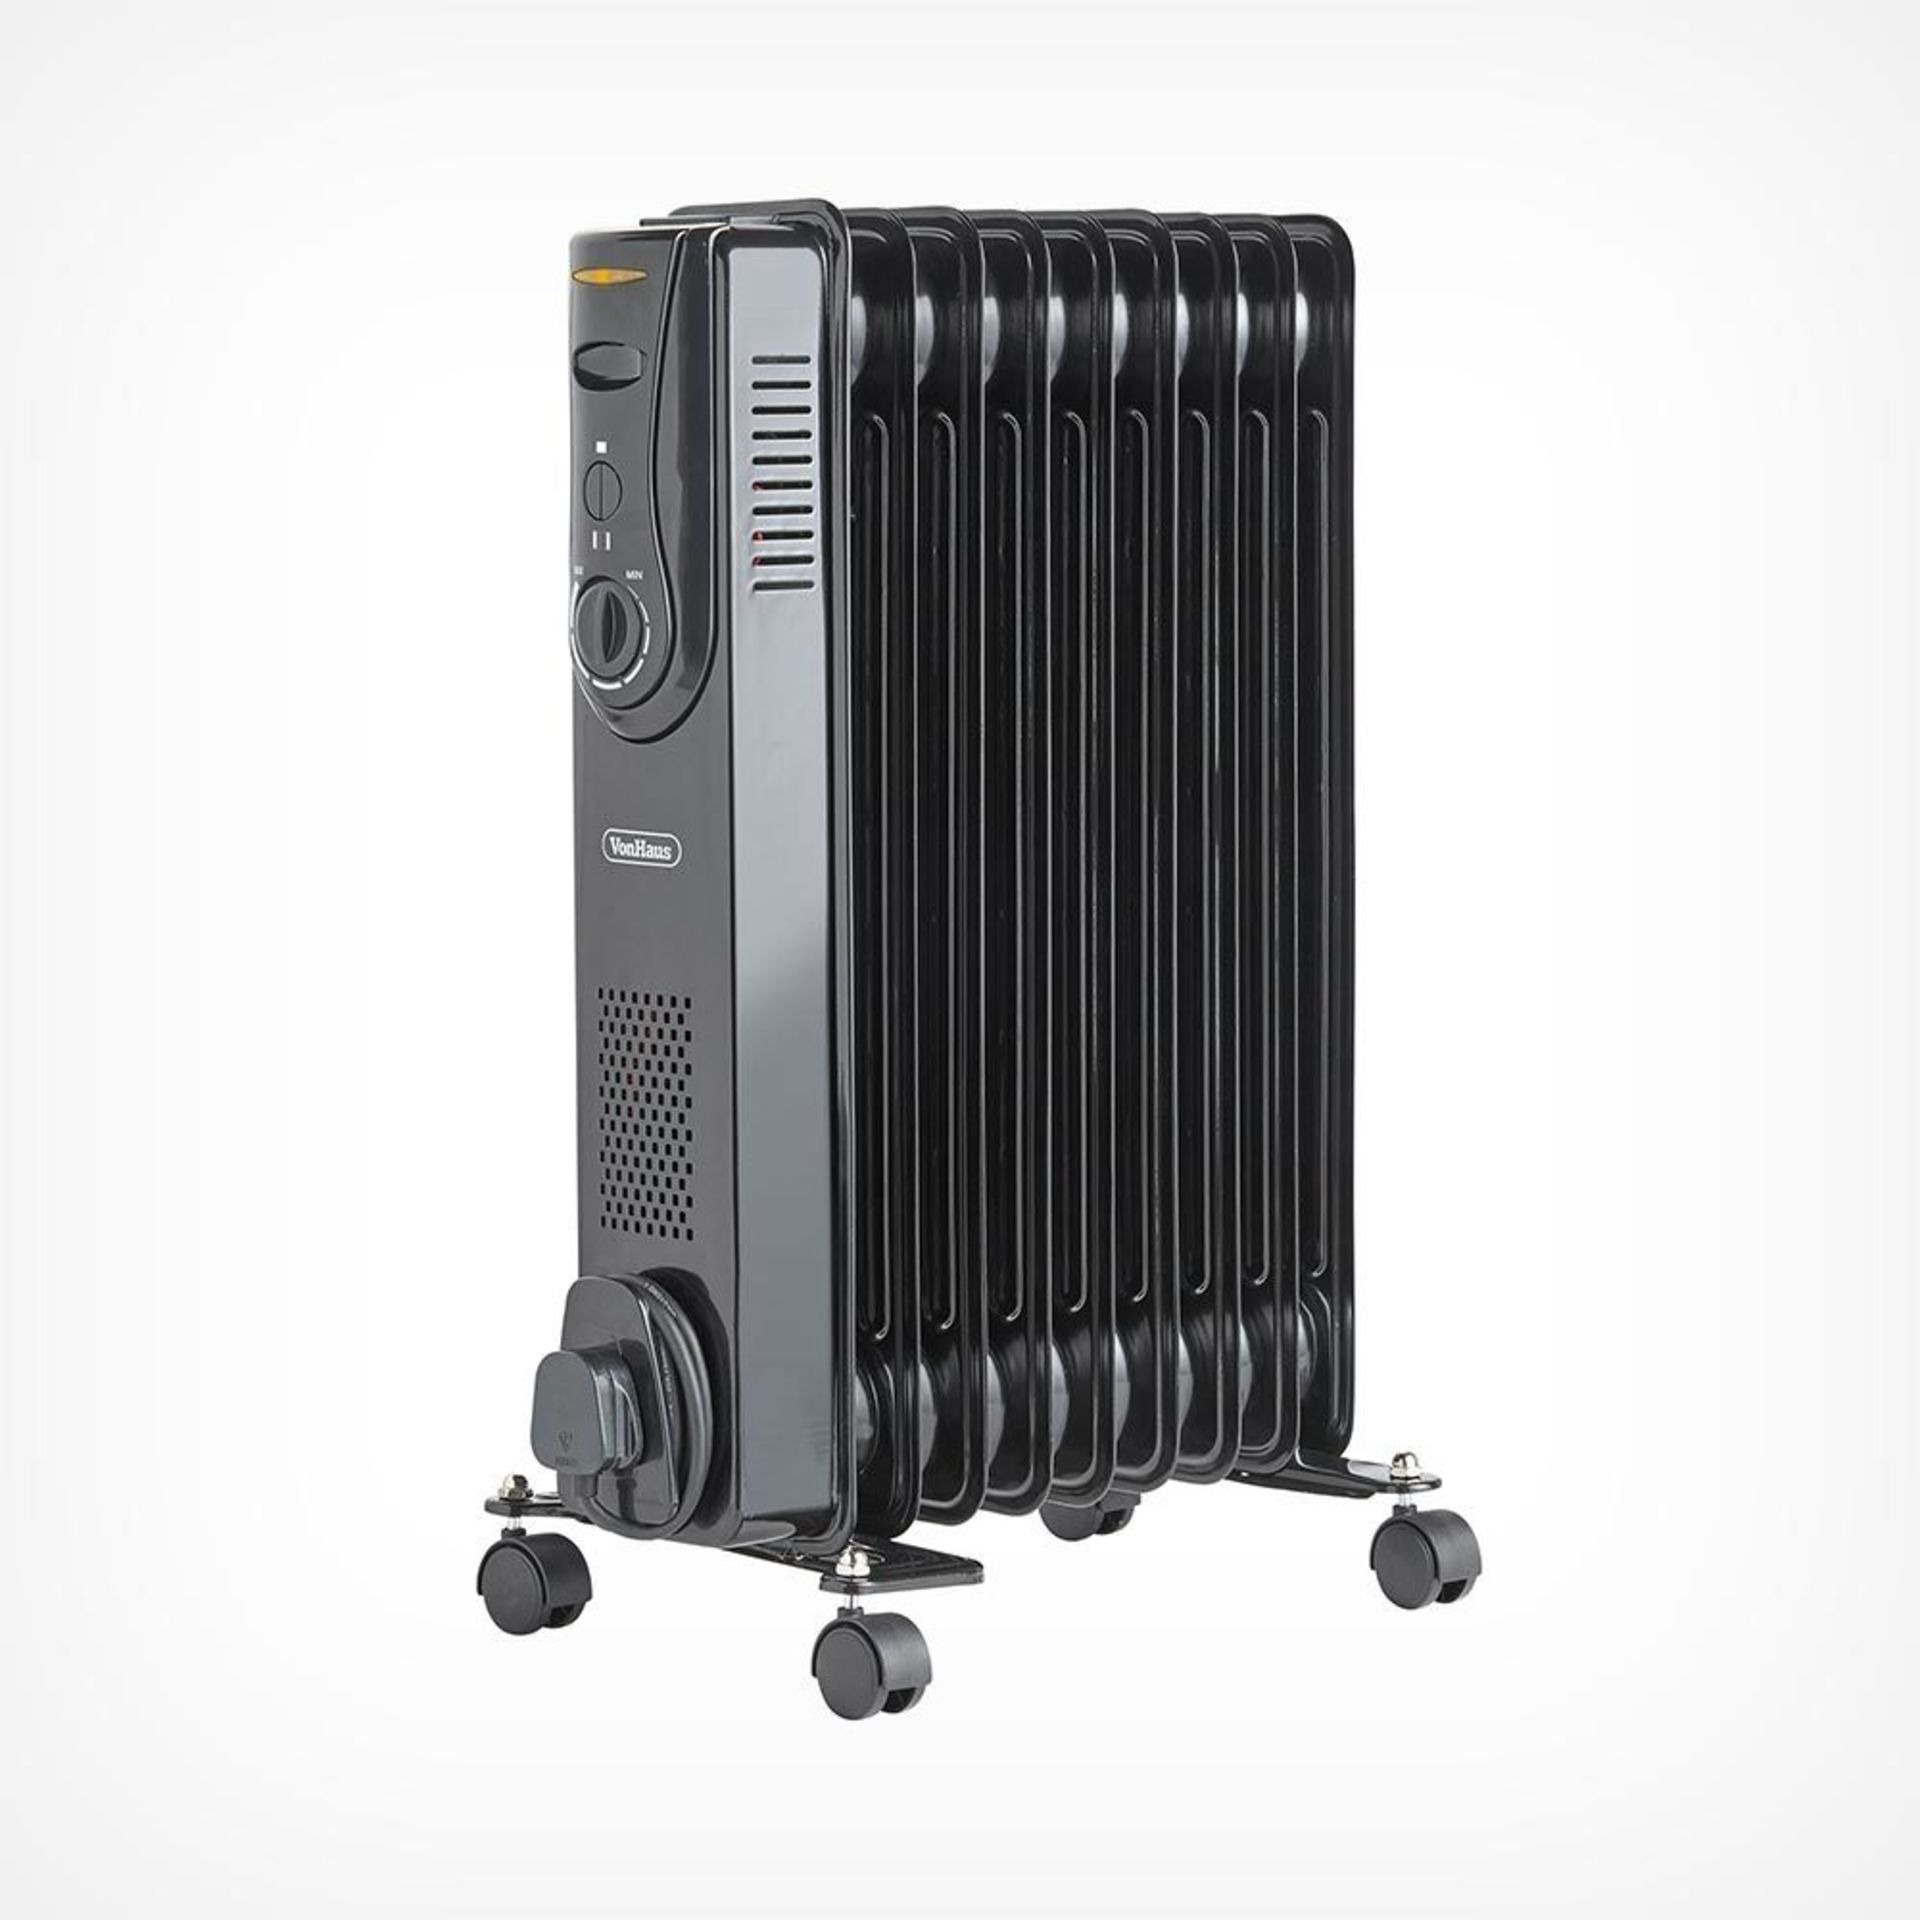 (CP114) 9 Fin 2000W Oil Filled Radiator - Black Powerful 2000W radiator with 9 oil-filled fins... - Image 3 of 5